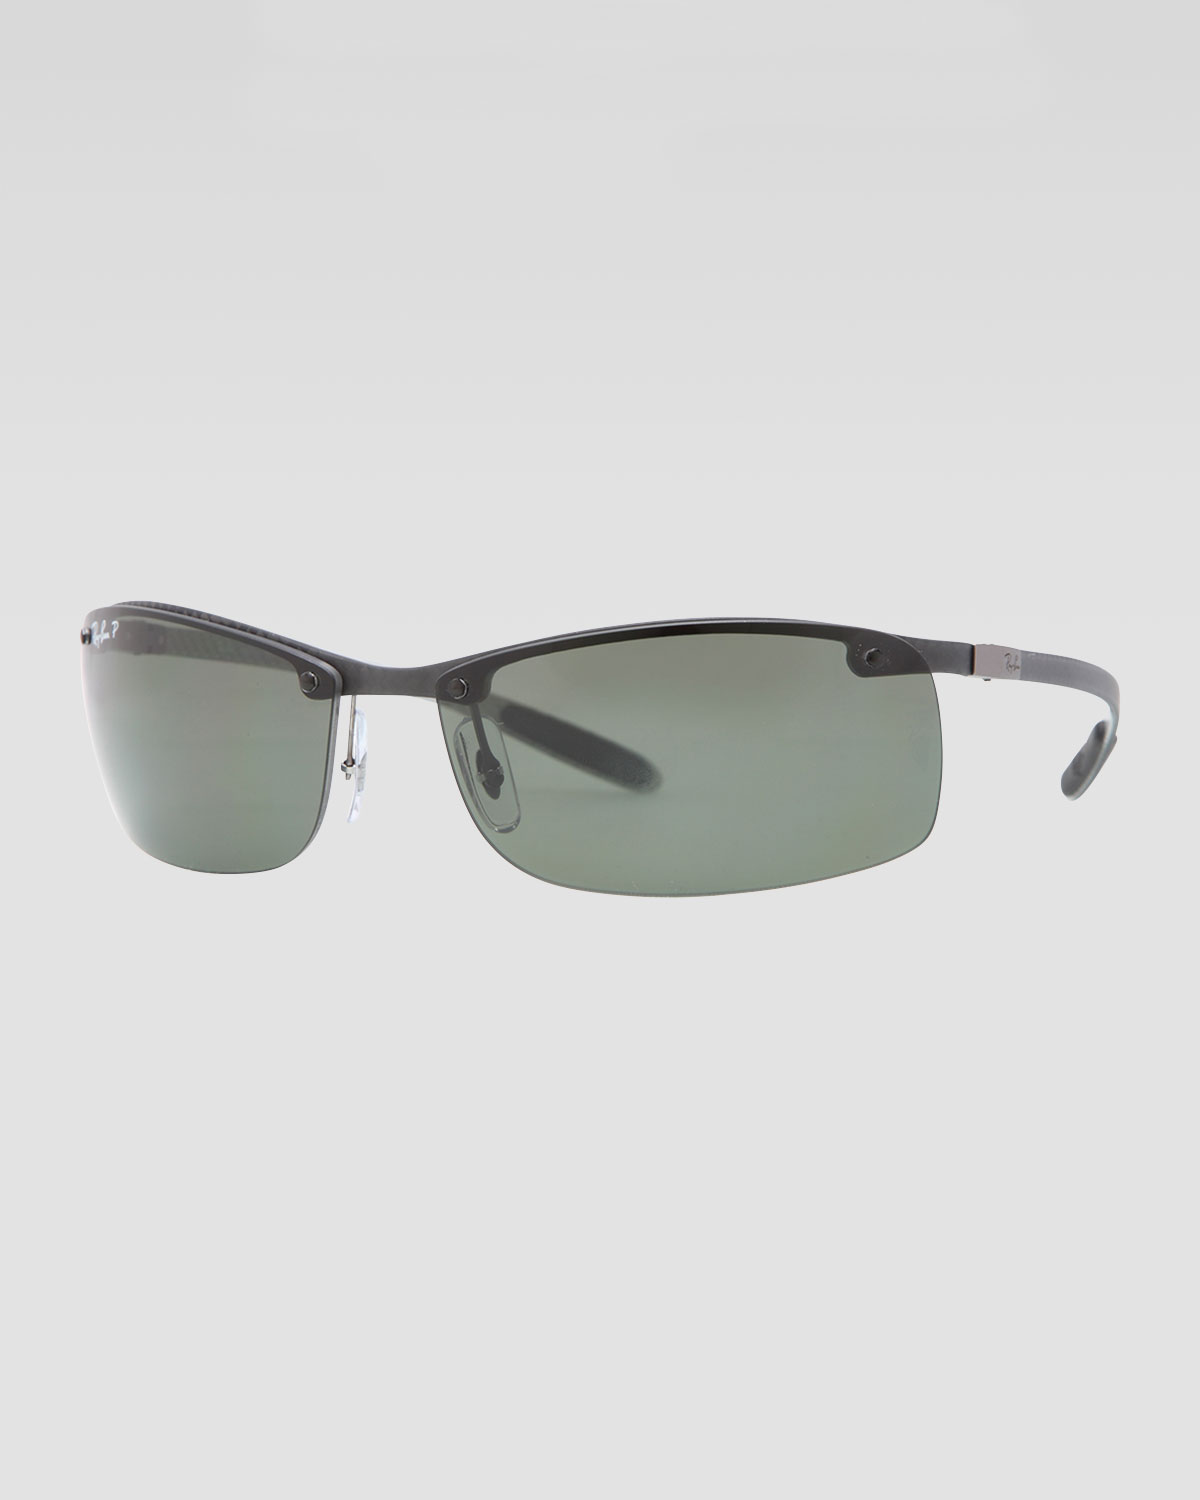 ray ban rectangle sunglasses on face